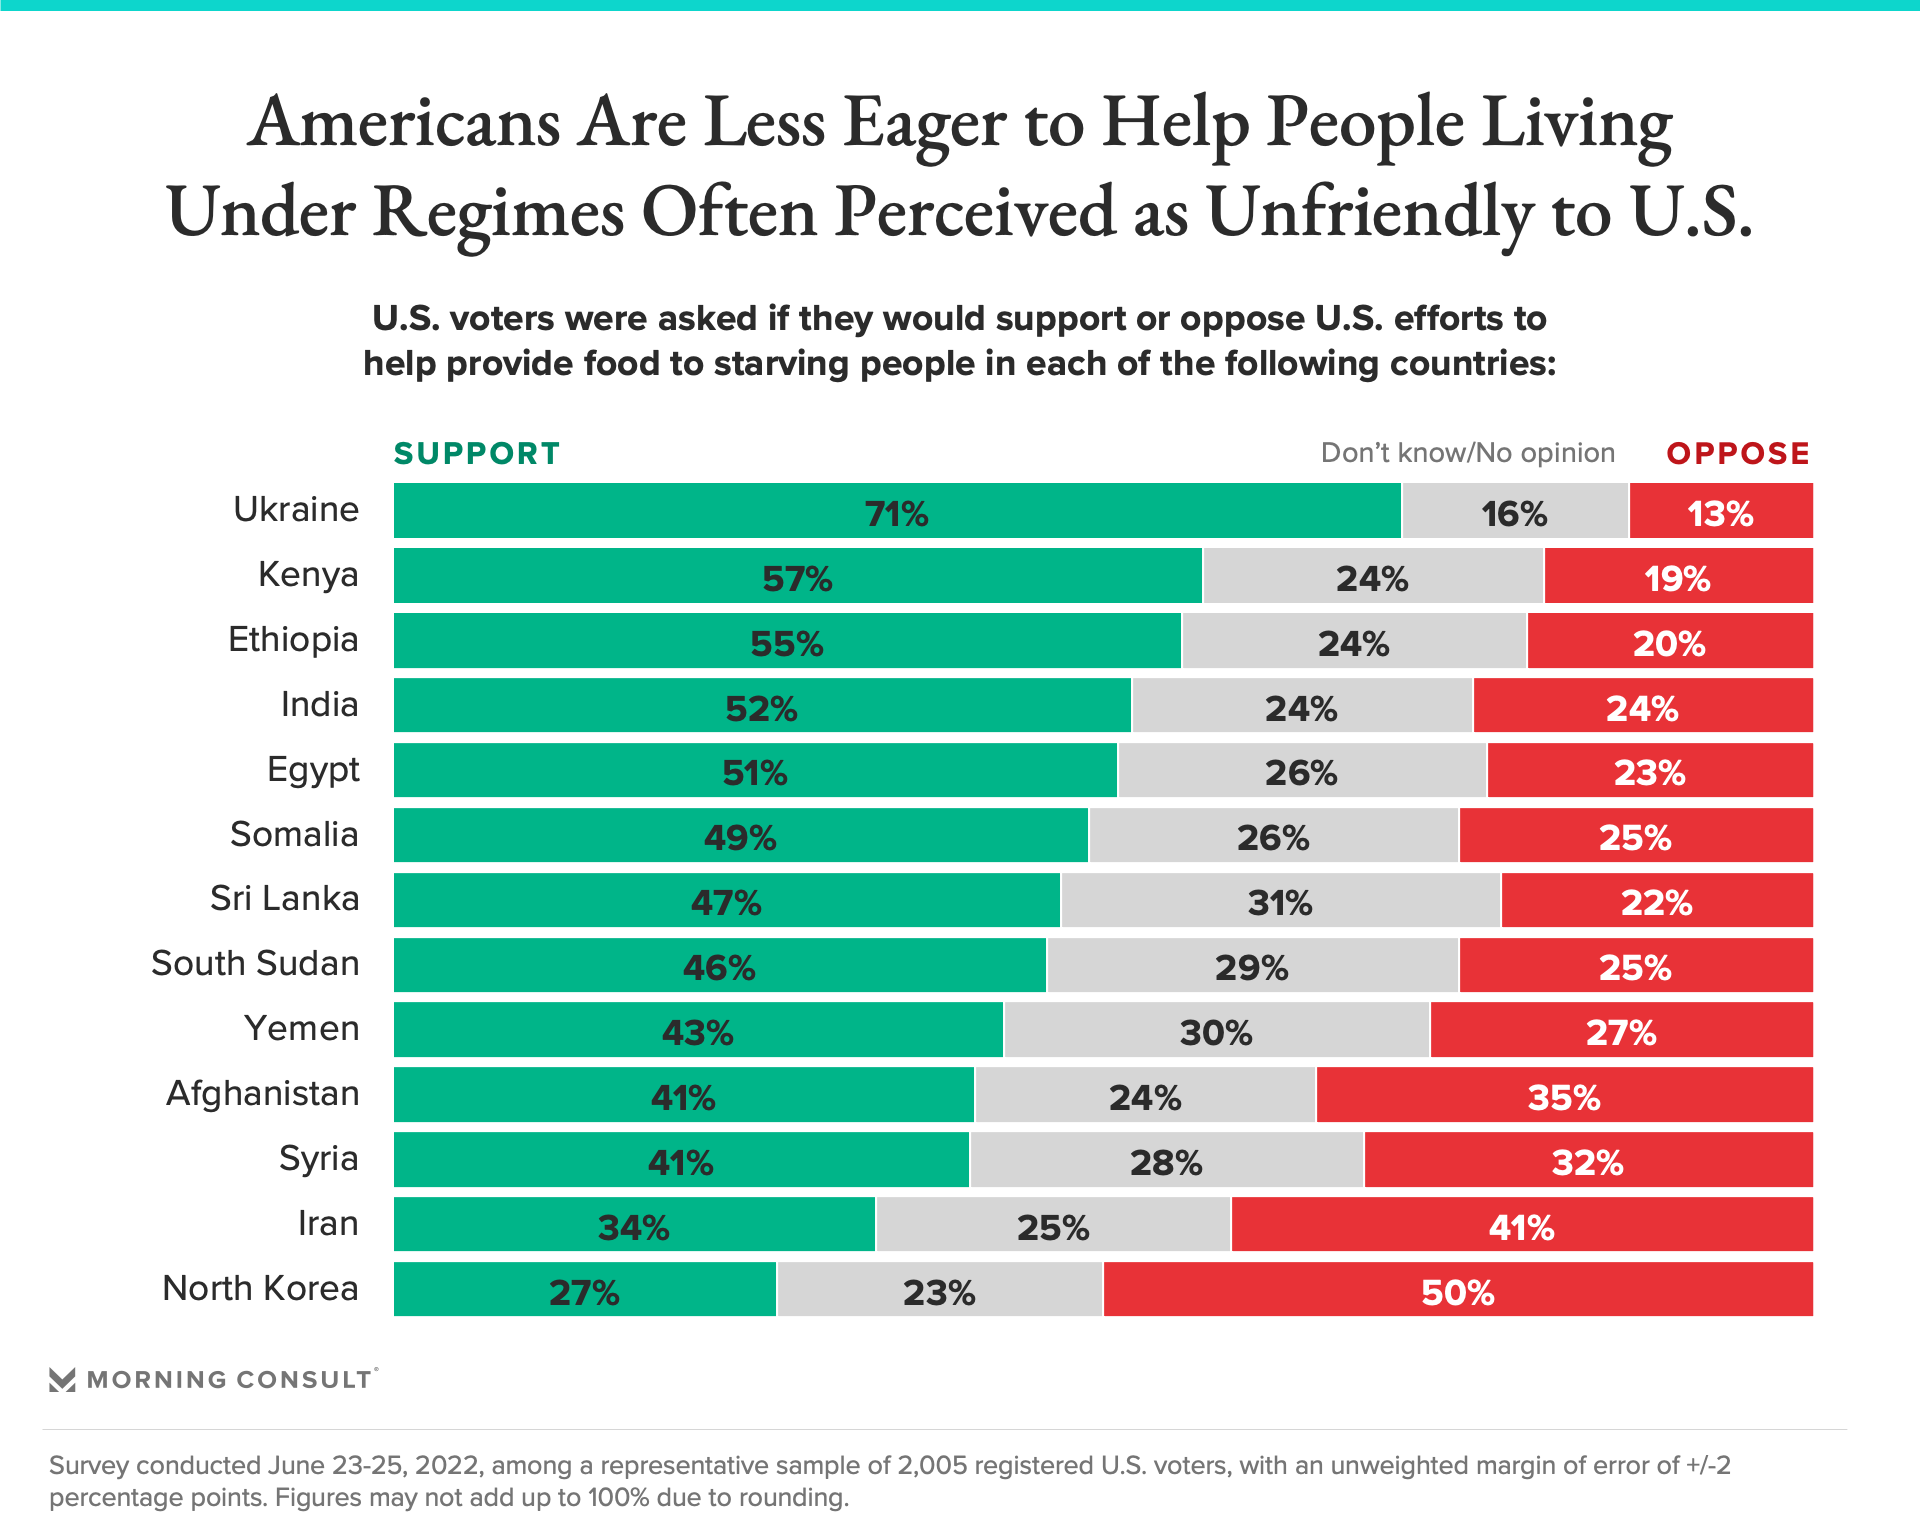 Chart showing that Americans are less eager to help people living under regimes perceived as unfriendly to the U.S.